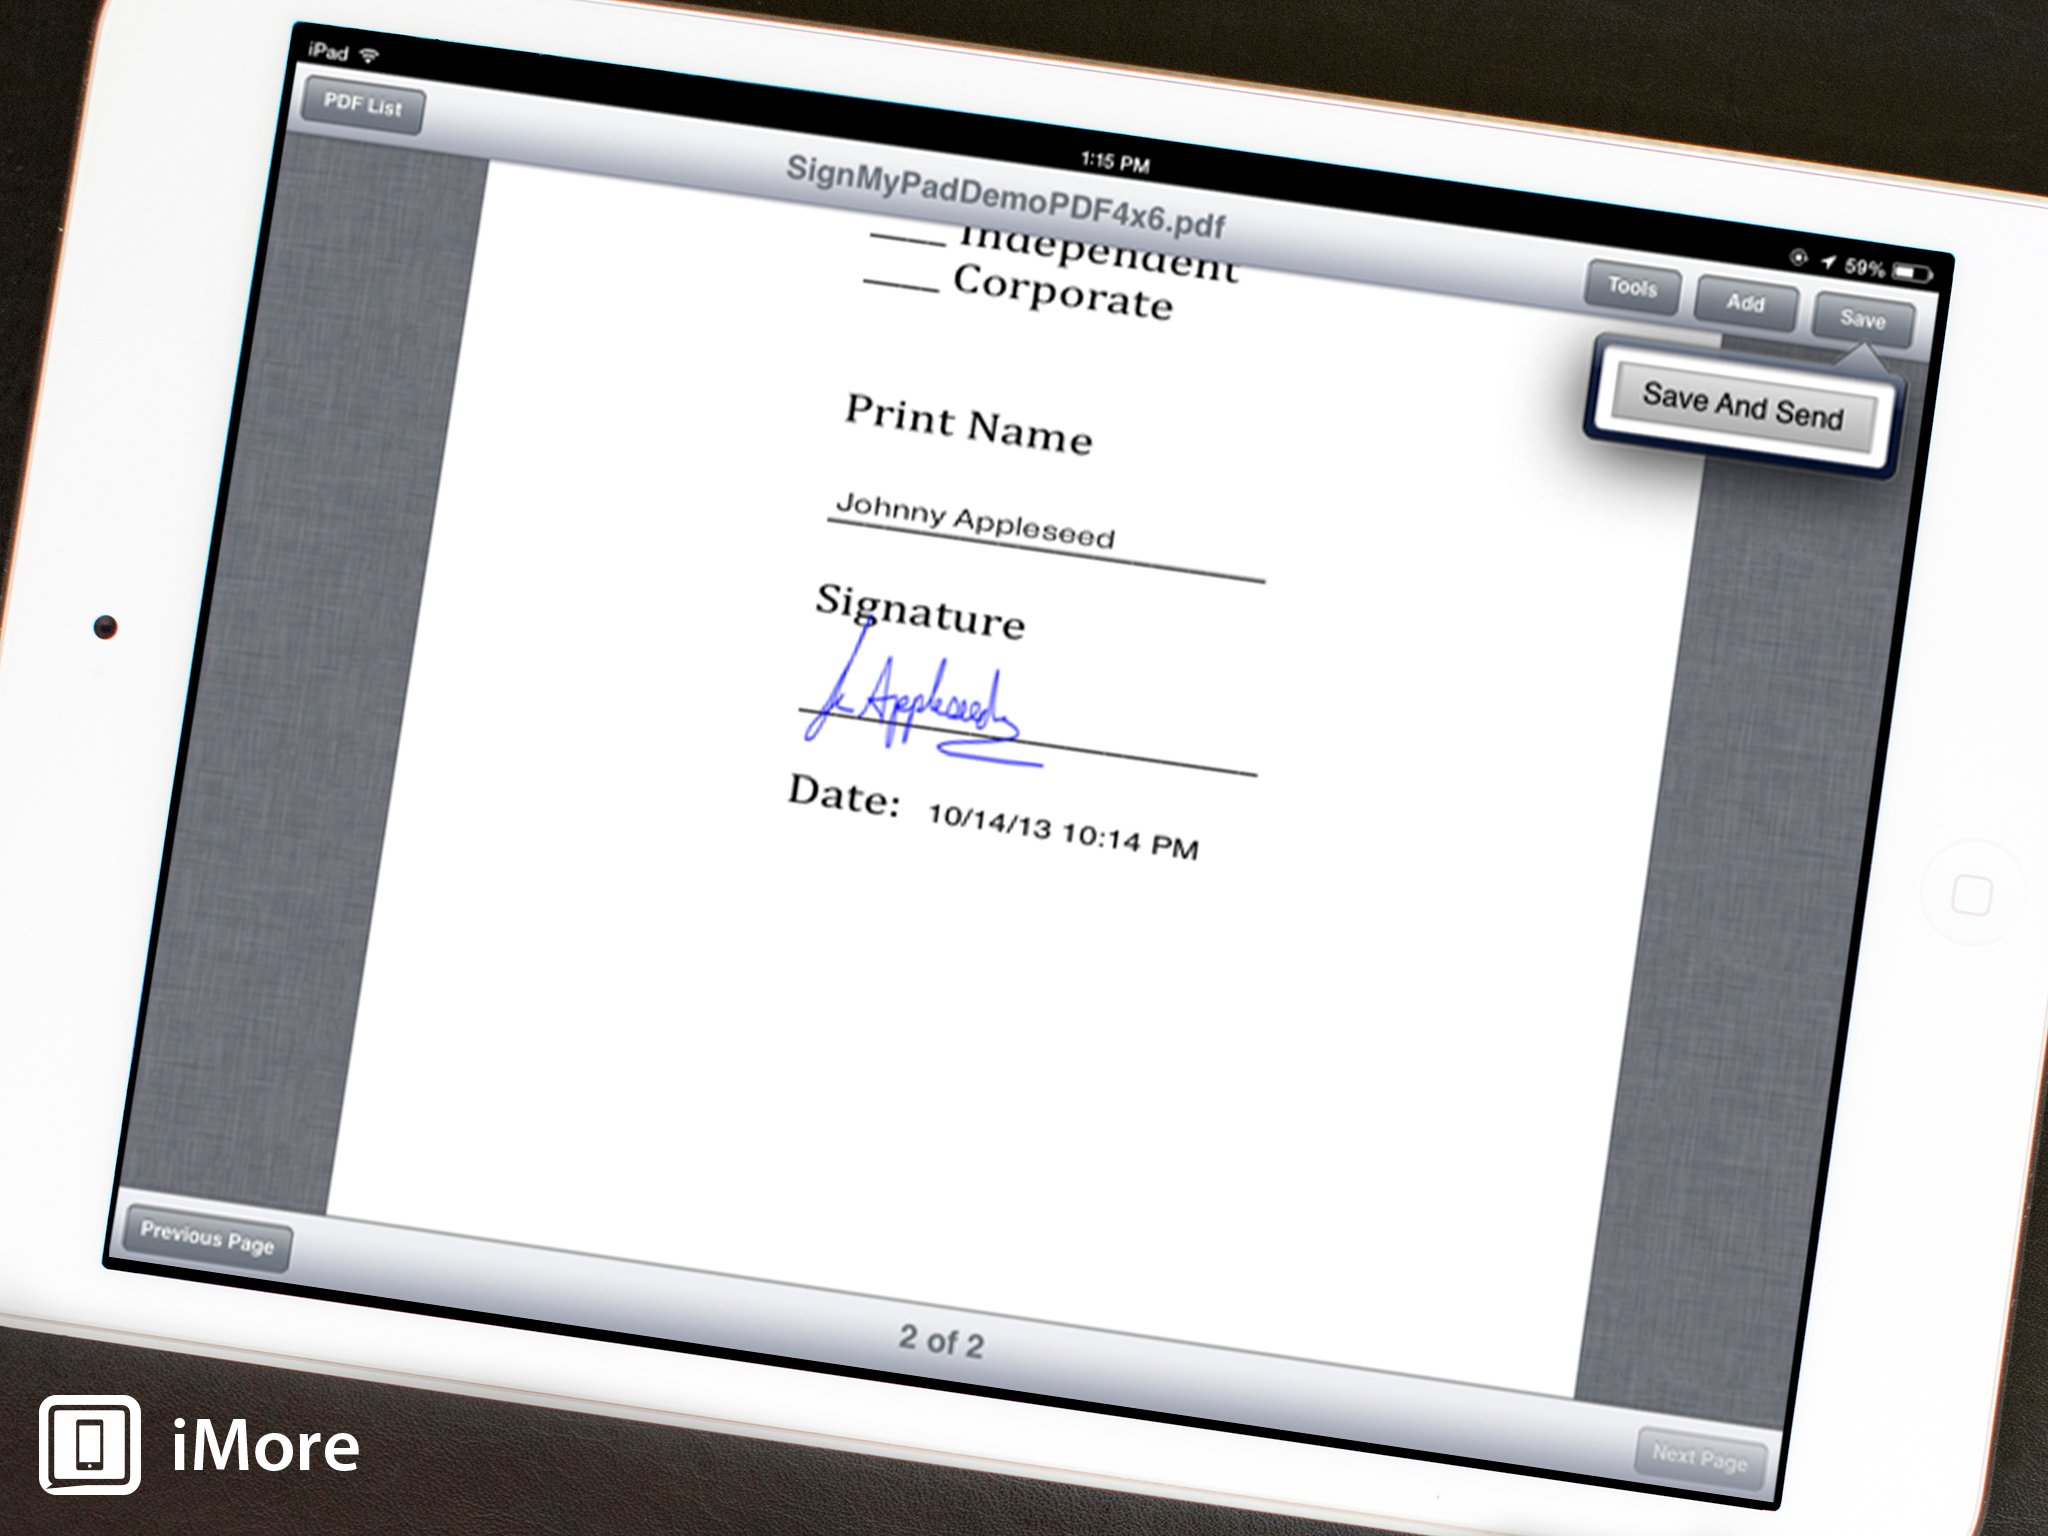 Manage and distribute documents with SignMyPad Cloud